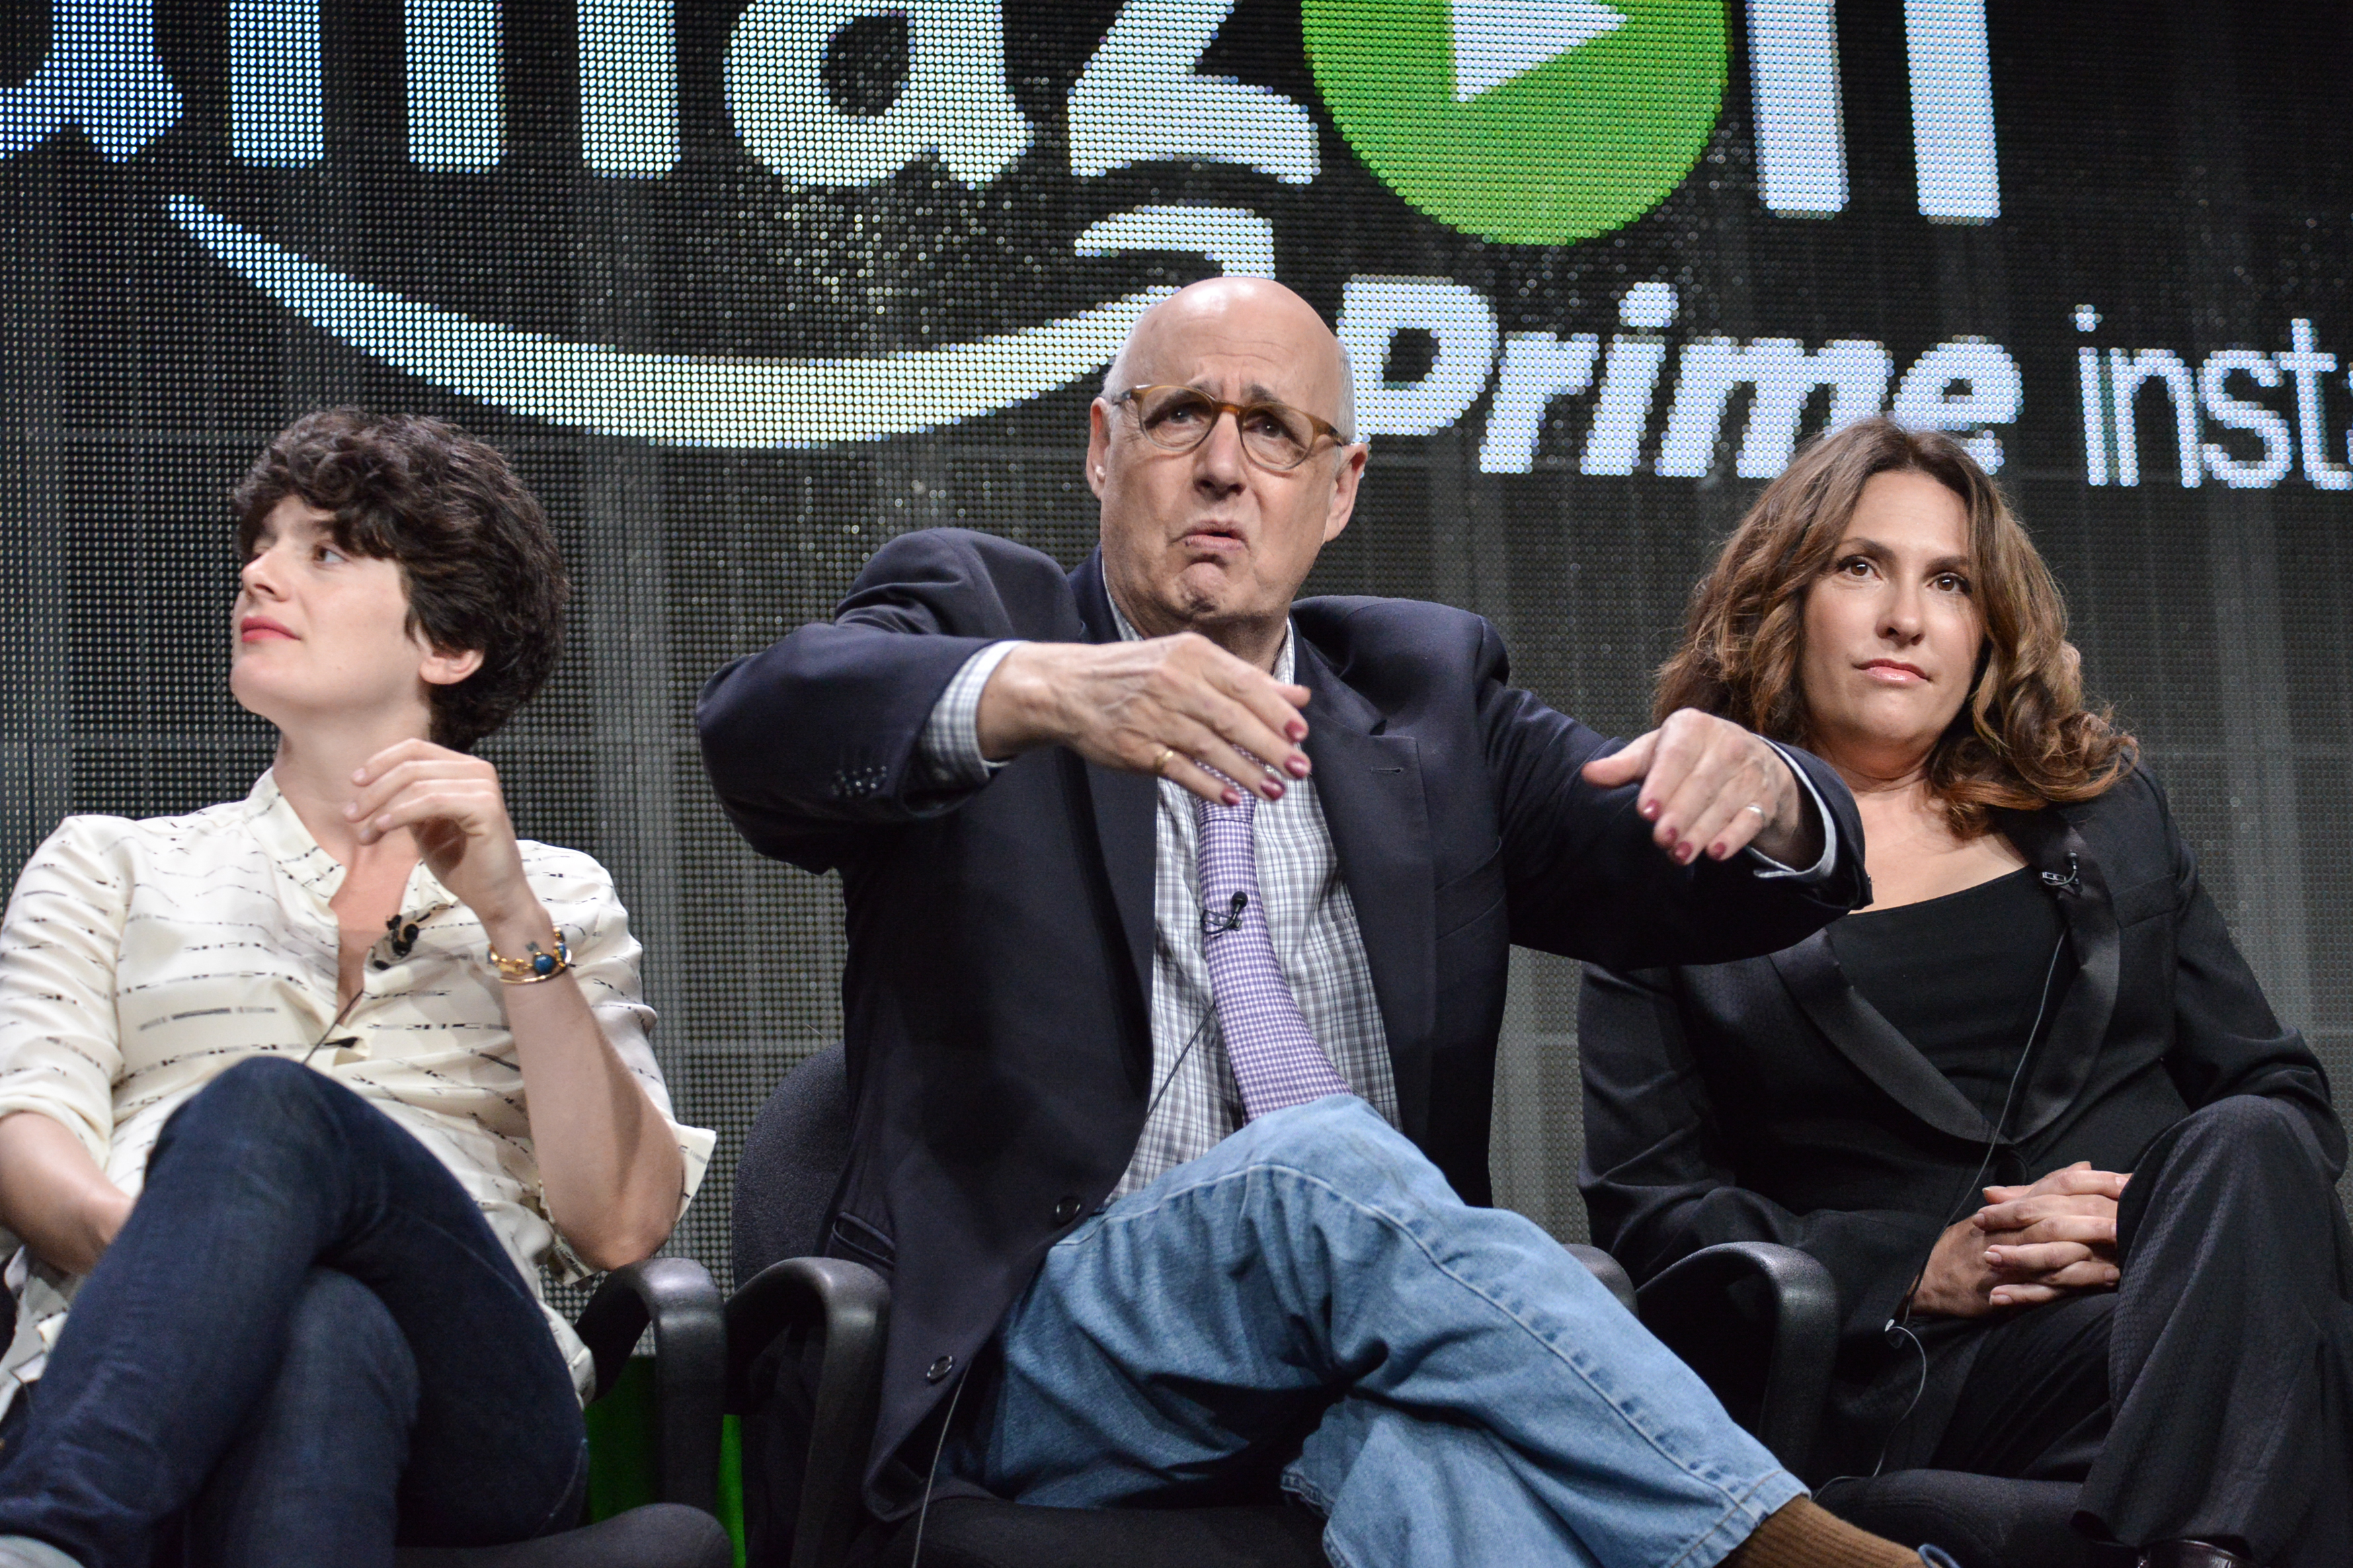 From left, Gaby Hoffmann, Jeffrey Tambor, and Jill Soloway speak onstage during the "Transparent" panel at the Amazon 2014 Summer TCA on Saturday, July 12, 2014, in Beverly Hills, Calif. (Photo by Richard Shotwell/Invision/AP) (Richard Shotwell&mdash;Richard Shotwell/Invision/AP)